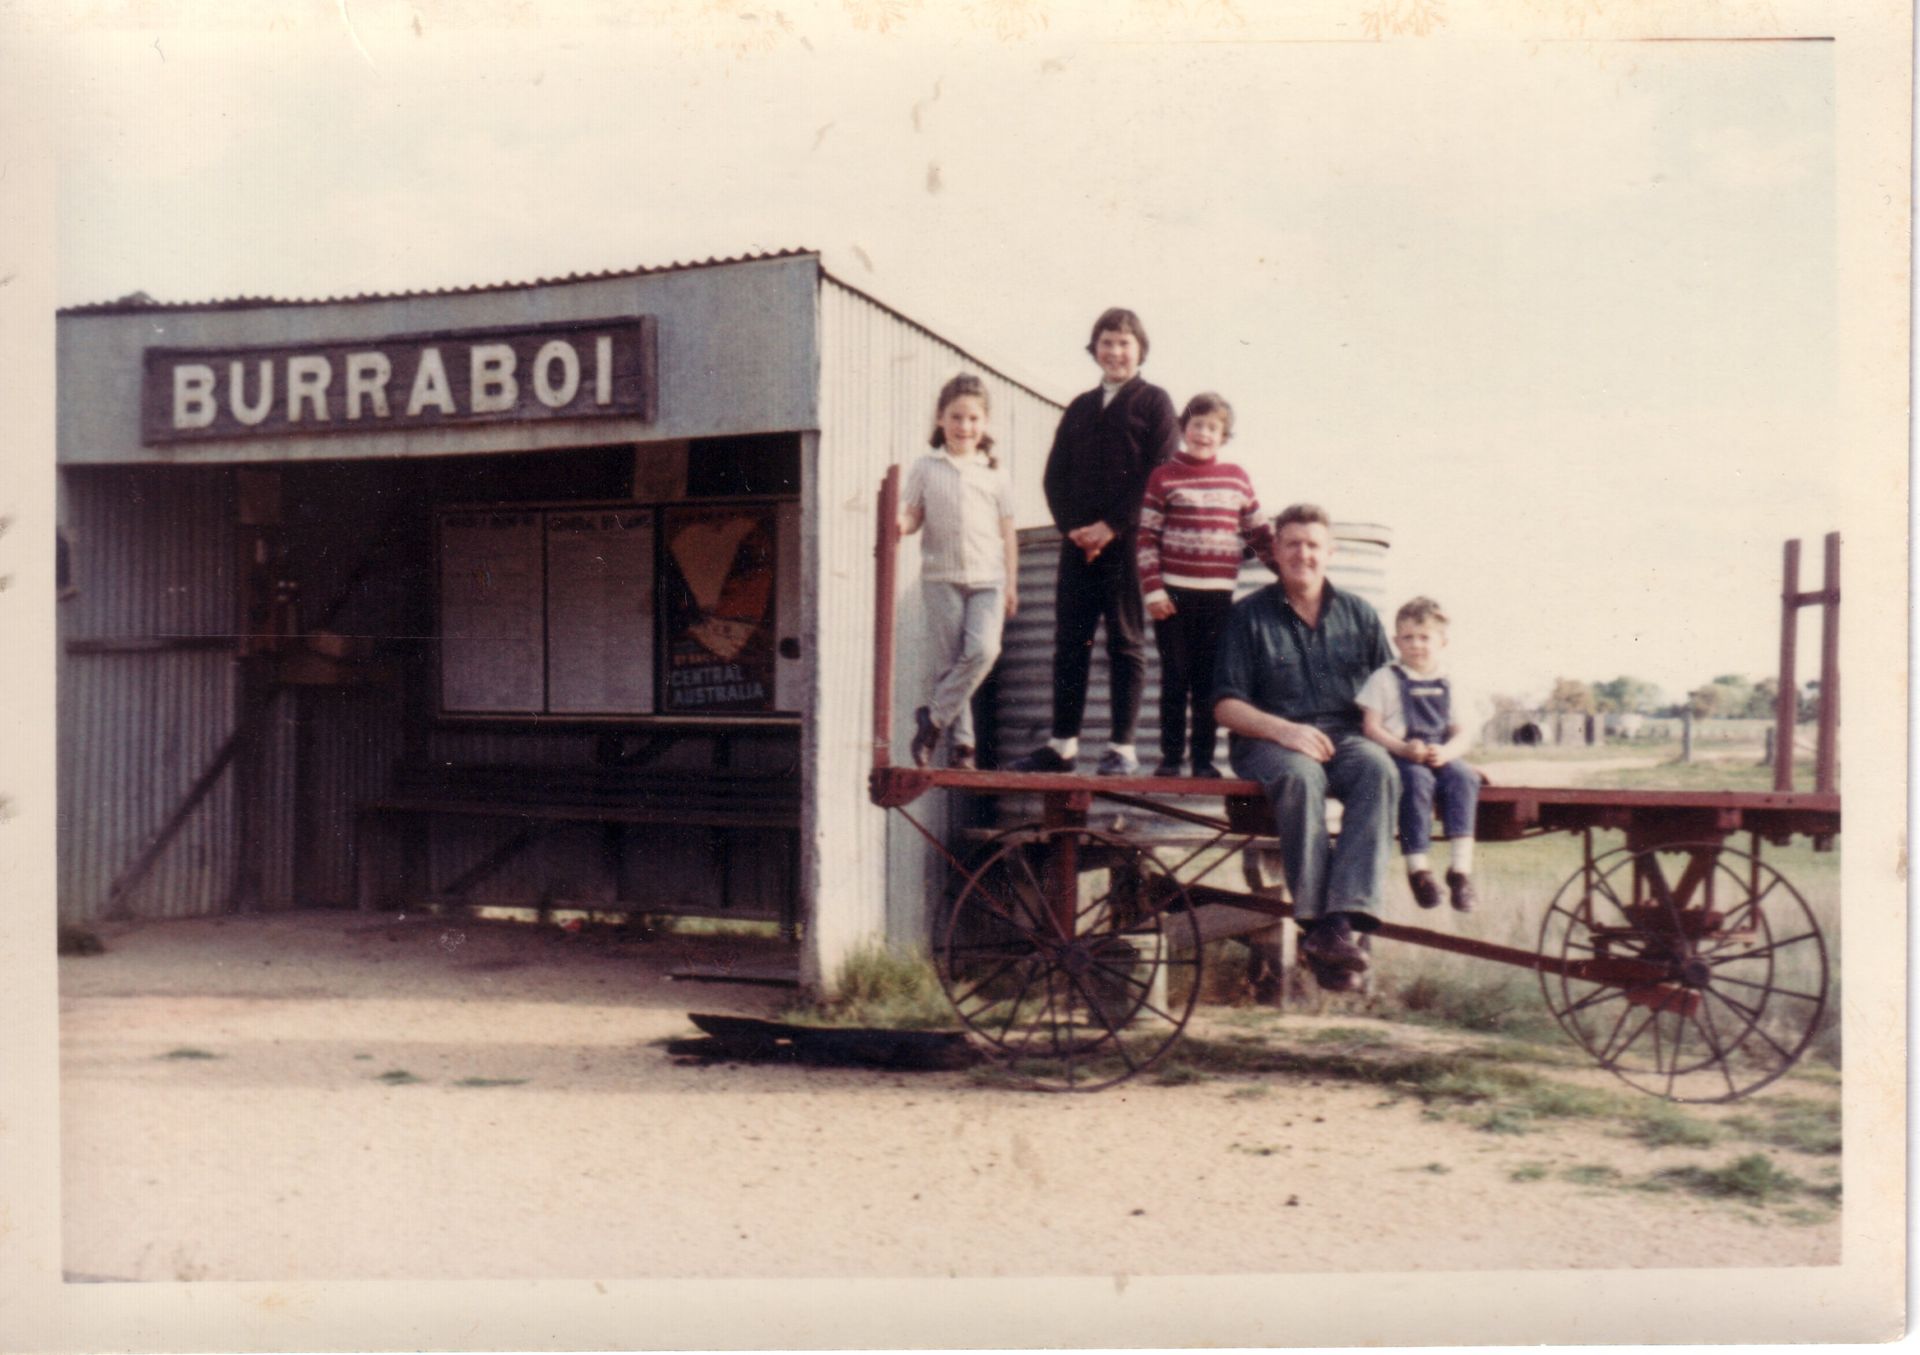 Cindy and Stacey Campbell,  Ross , Sue and Cherry Ellis at Burraboi NSW, late 1960's.